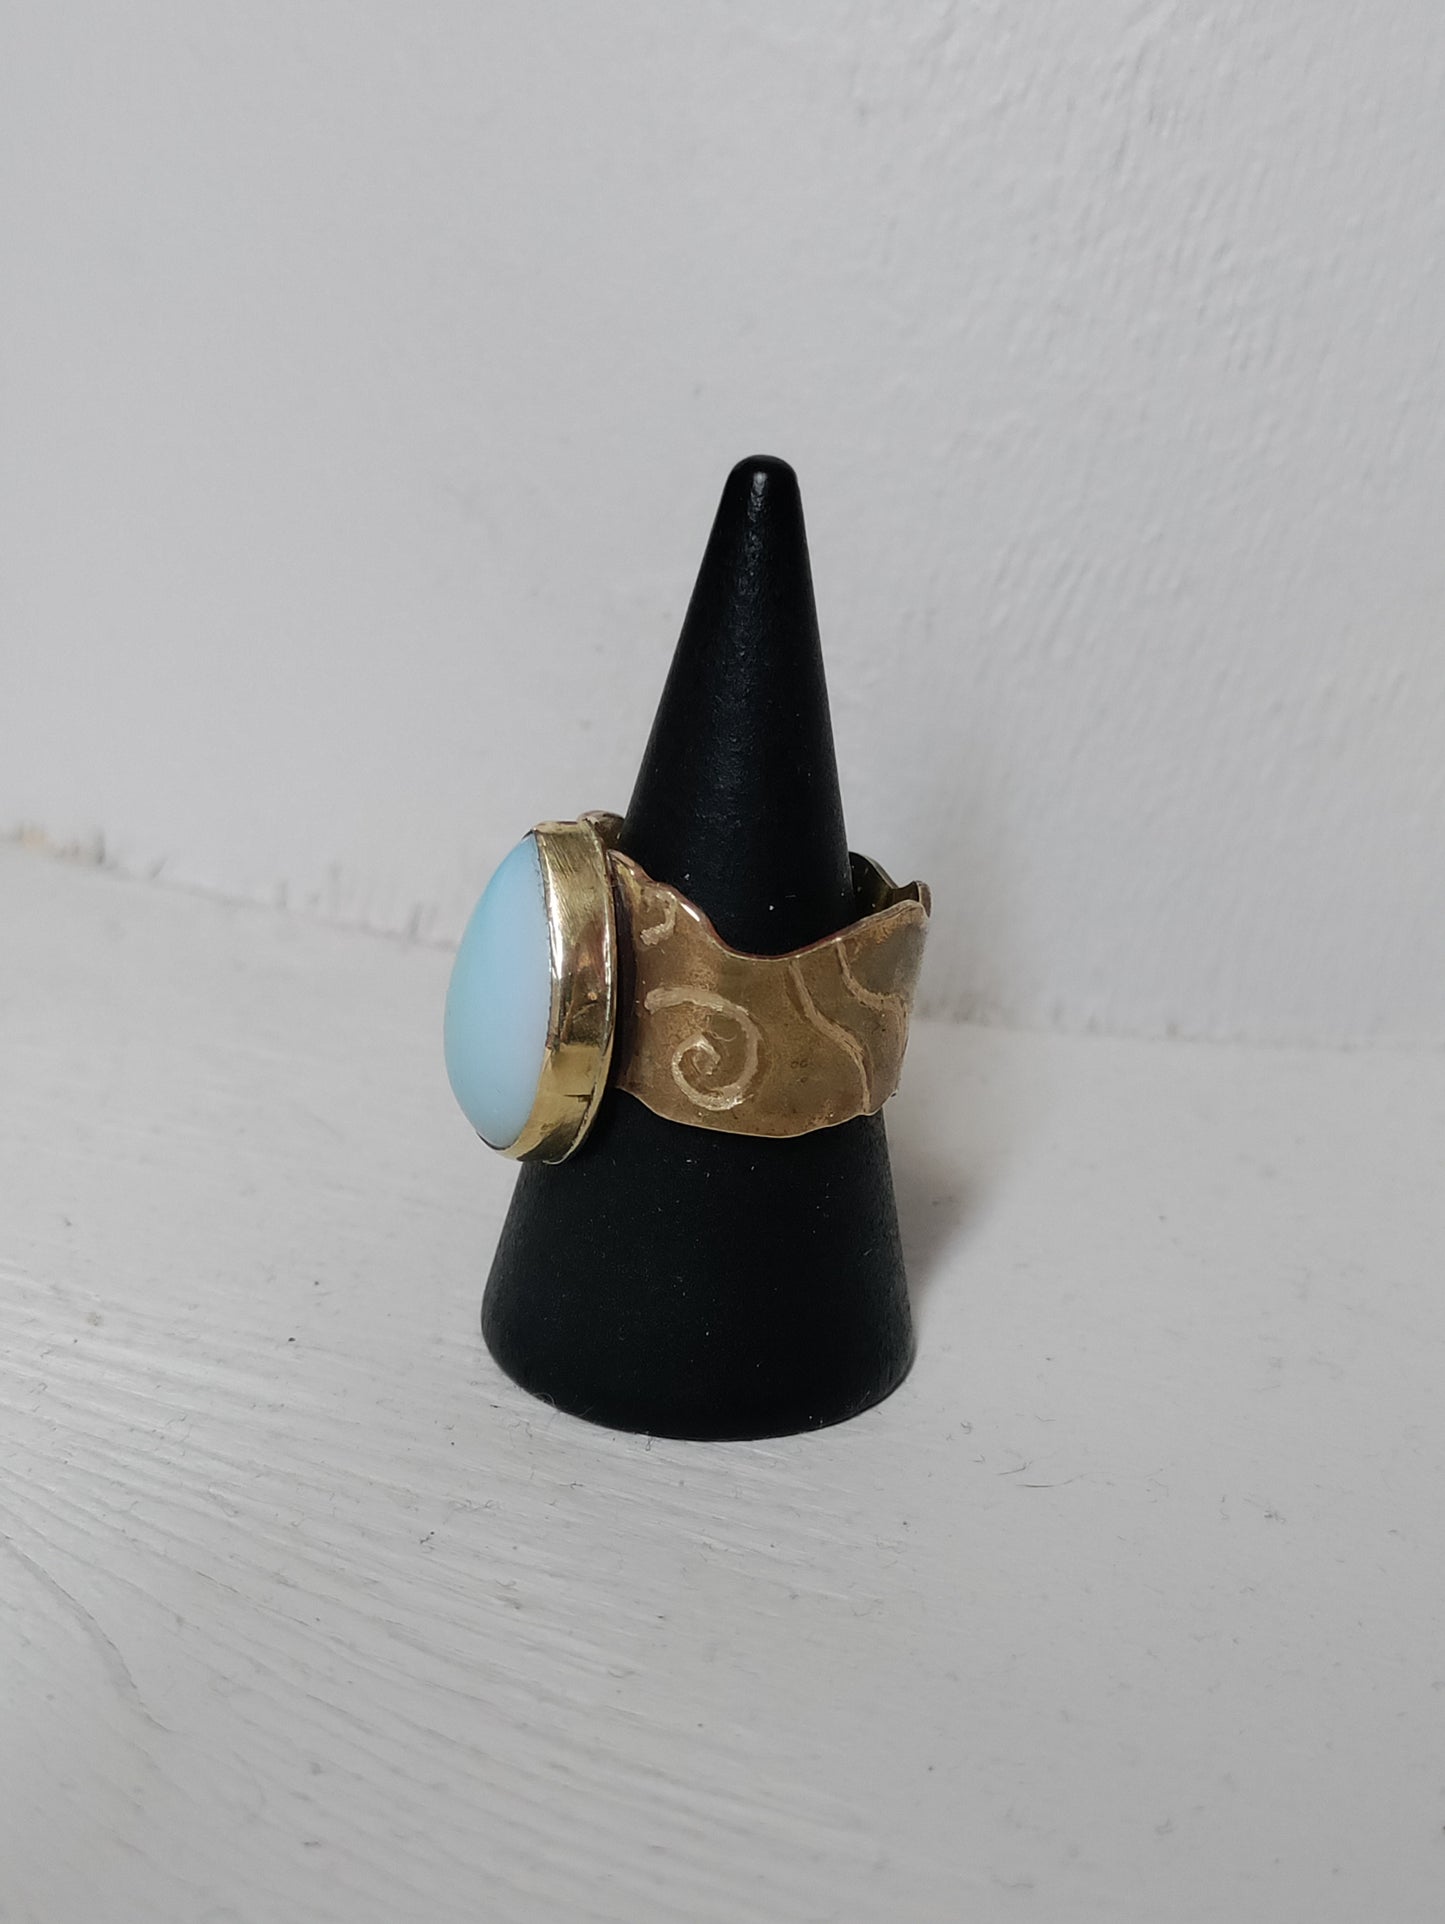 Fairy style patina ring with drop opalite stone LEIA&CO